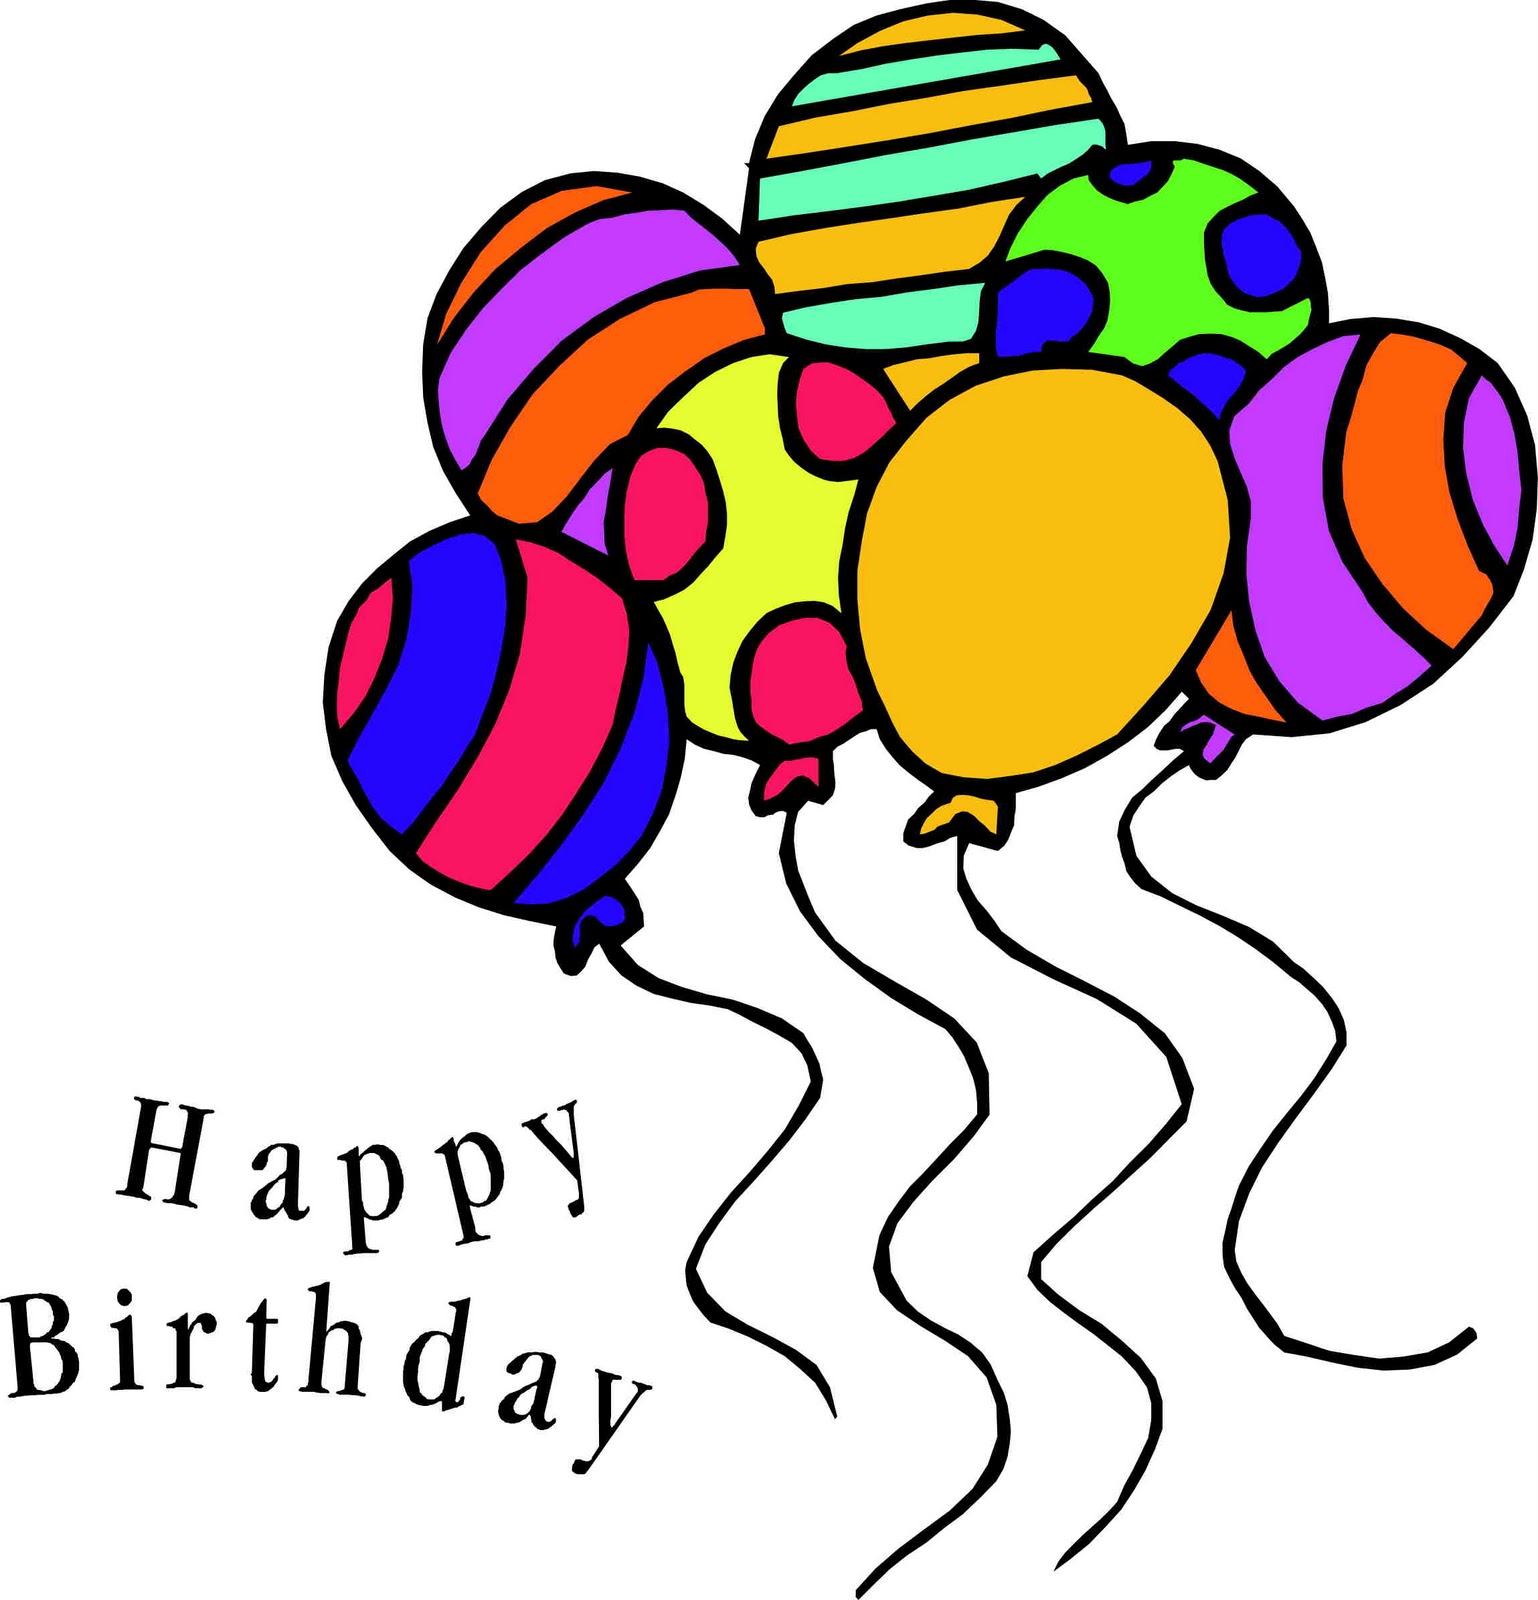 Clip Arts Related To : clip art free birthday. view all birthday-art-...